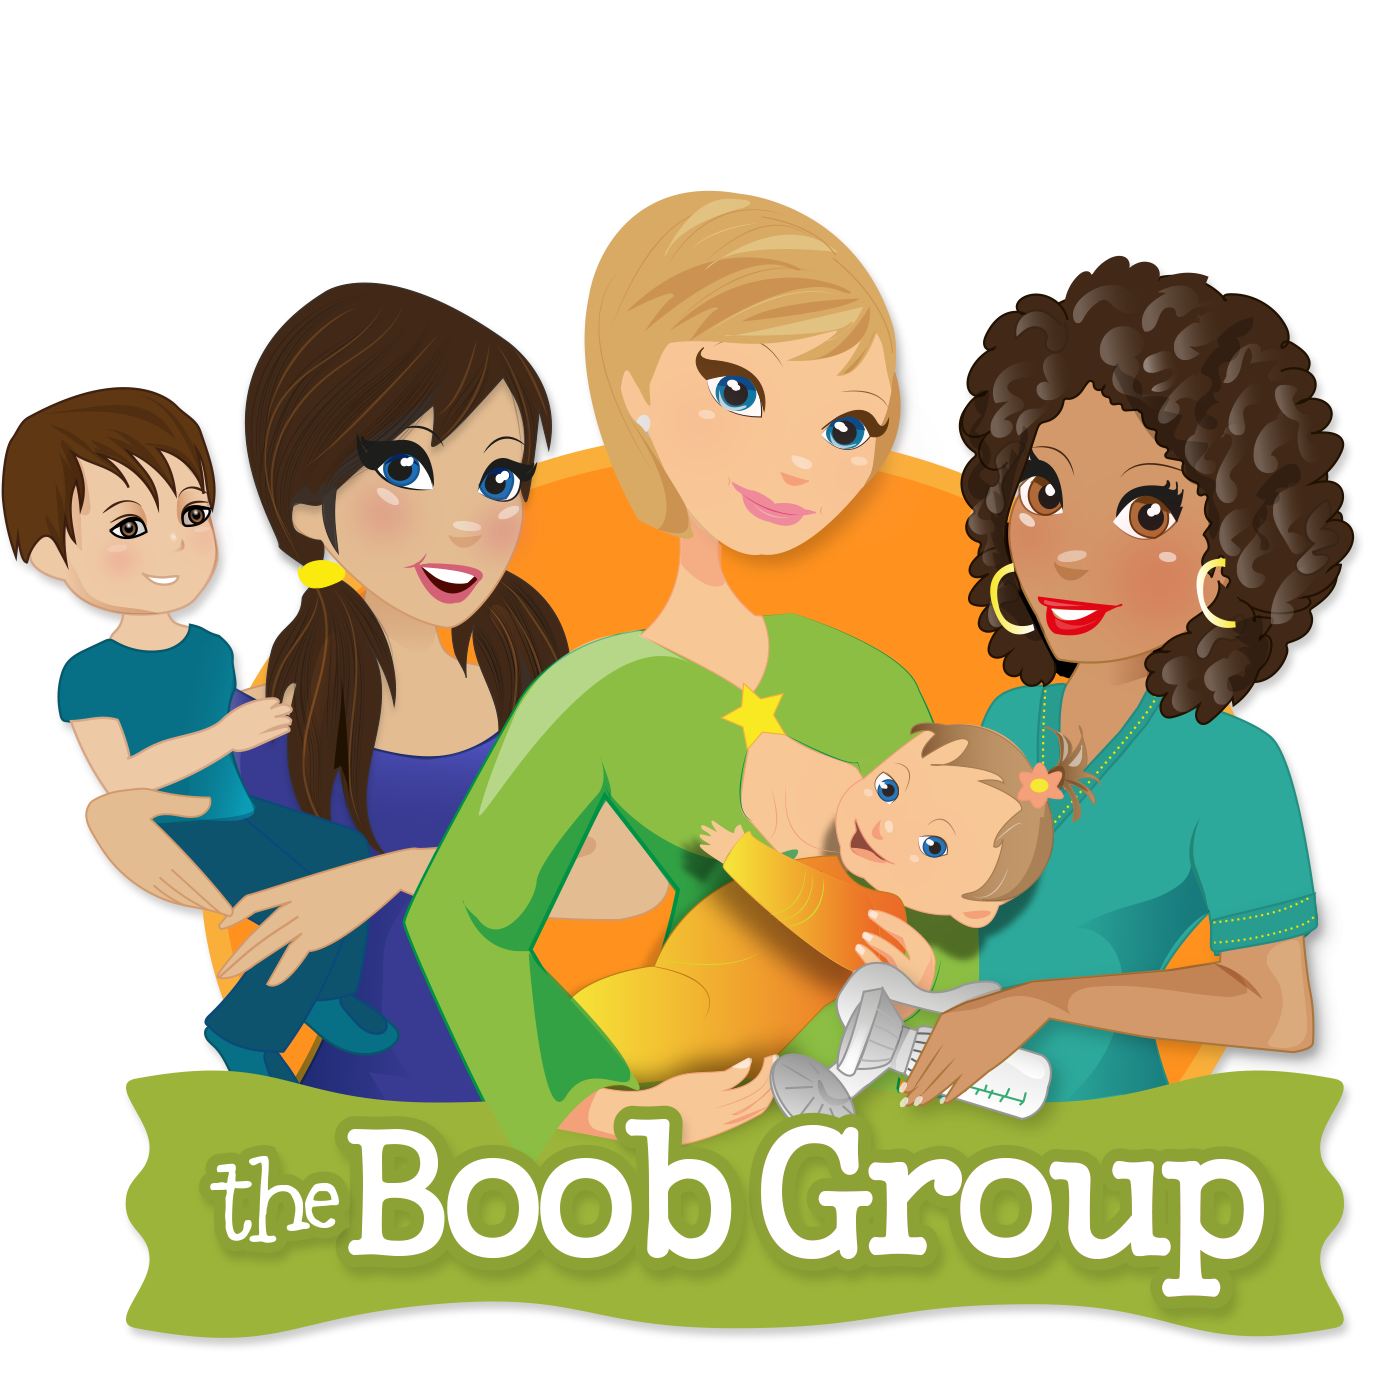 Proud clipart supportive parent. About the boob group